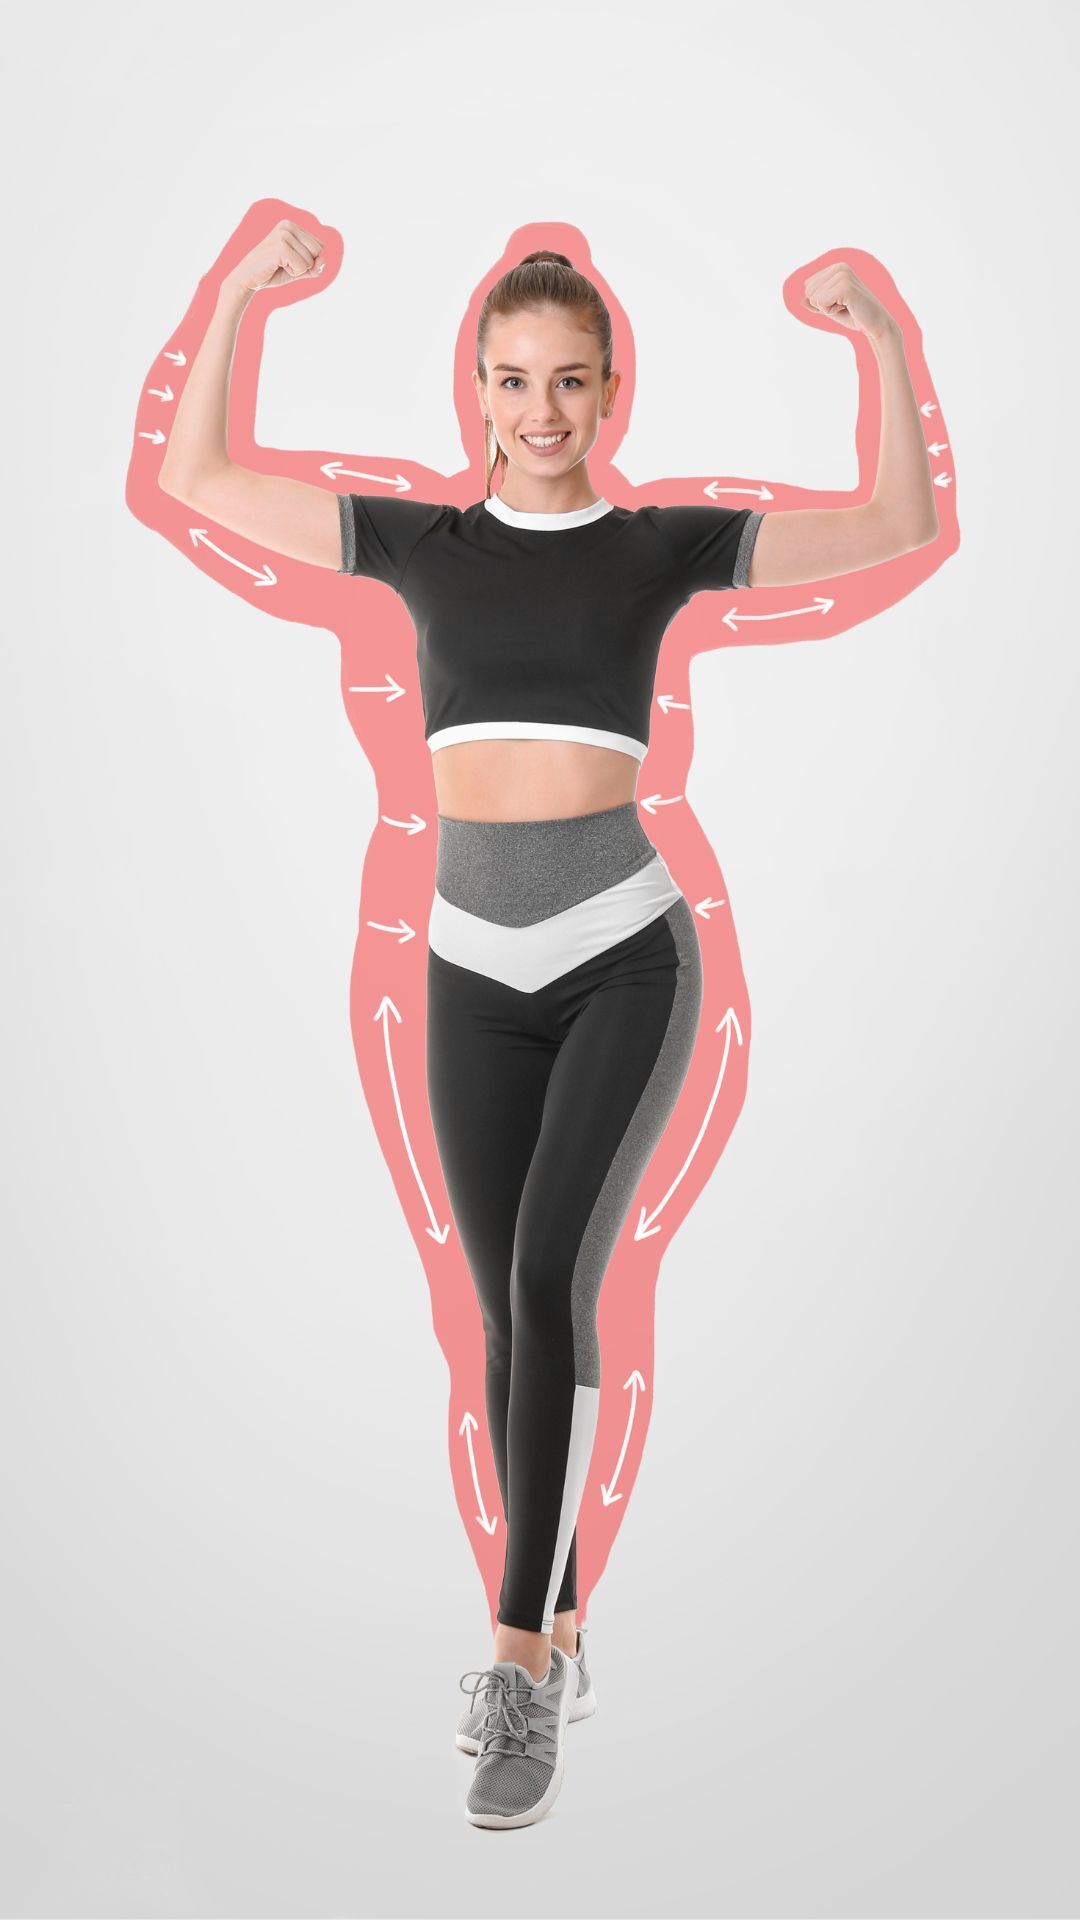 Strong woman with excercise outflit showcasing strengh posture - Biofuse